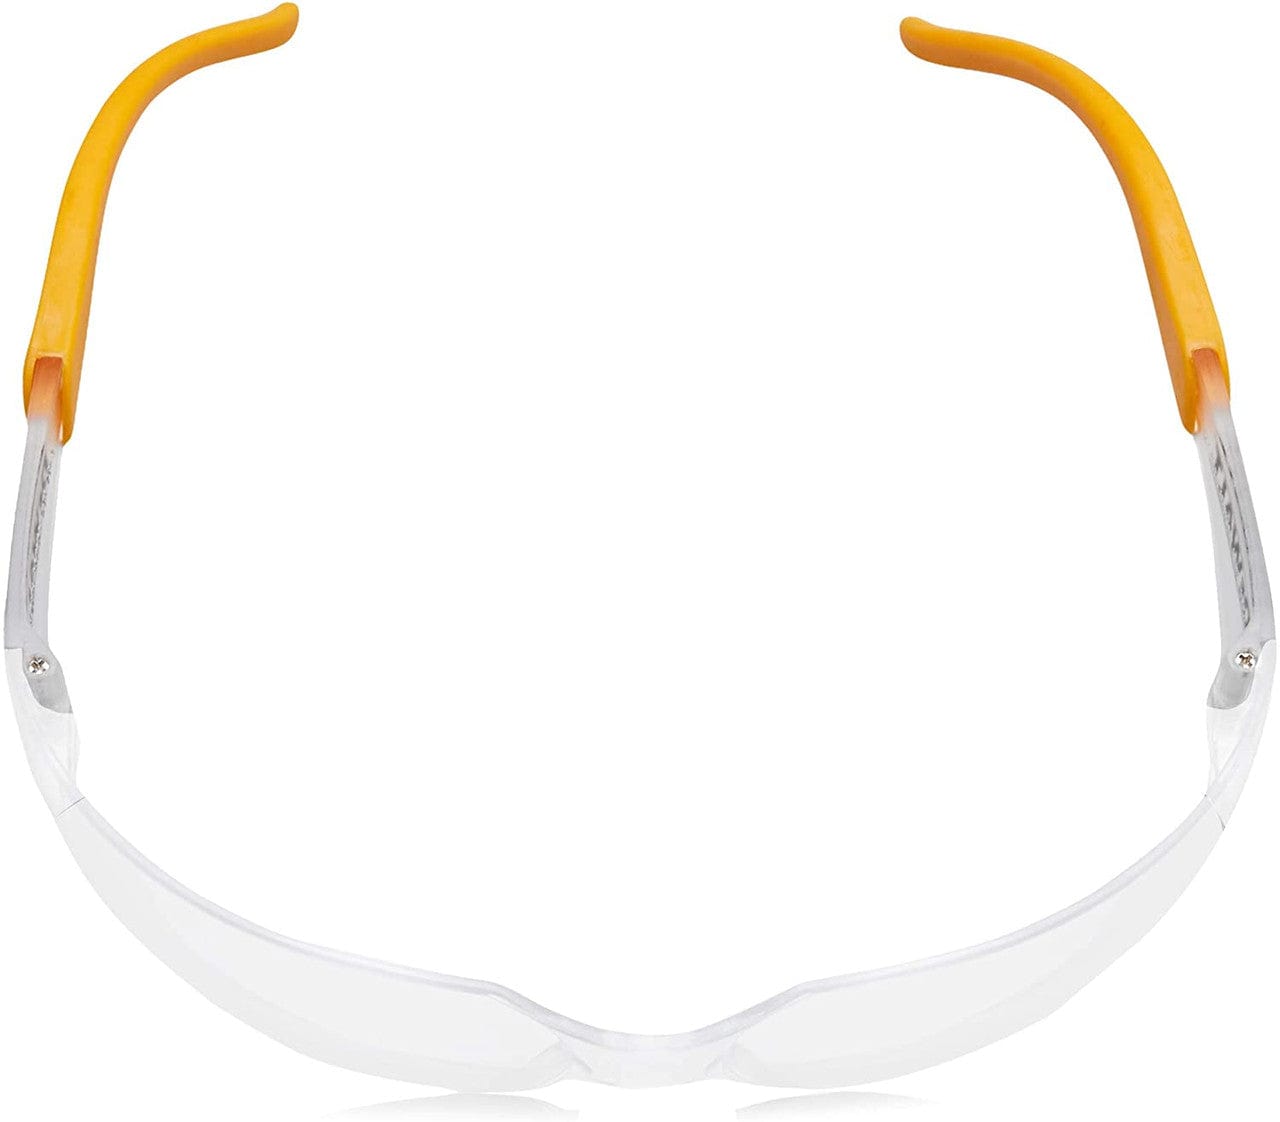 DEWALT Protector Safety Glasses with Clear Lens DPG54-1D Top View